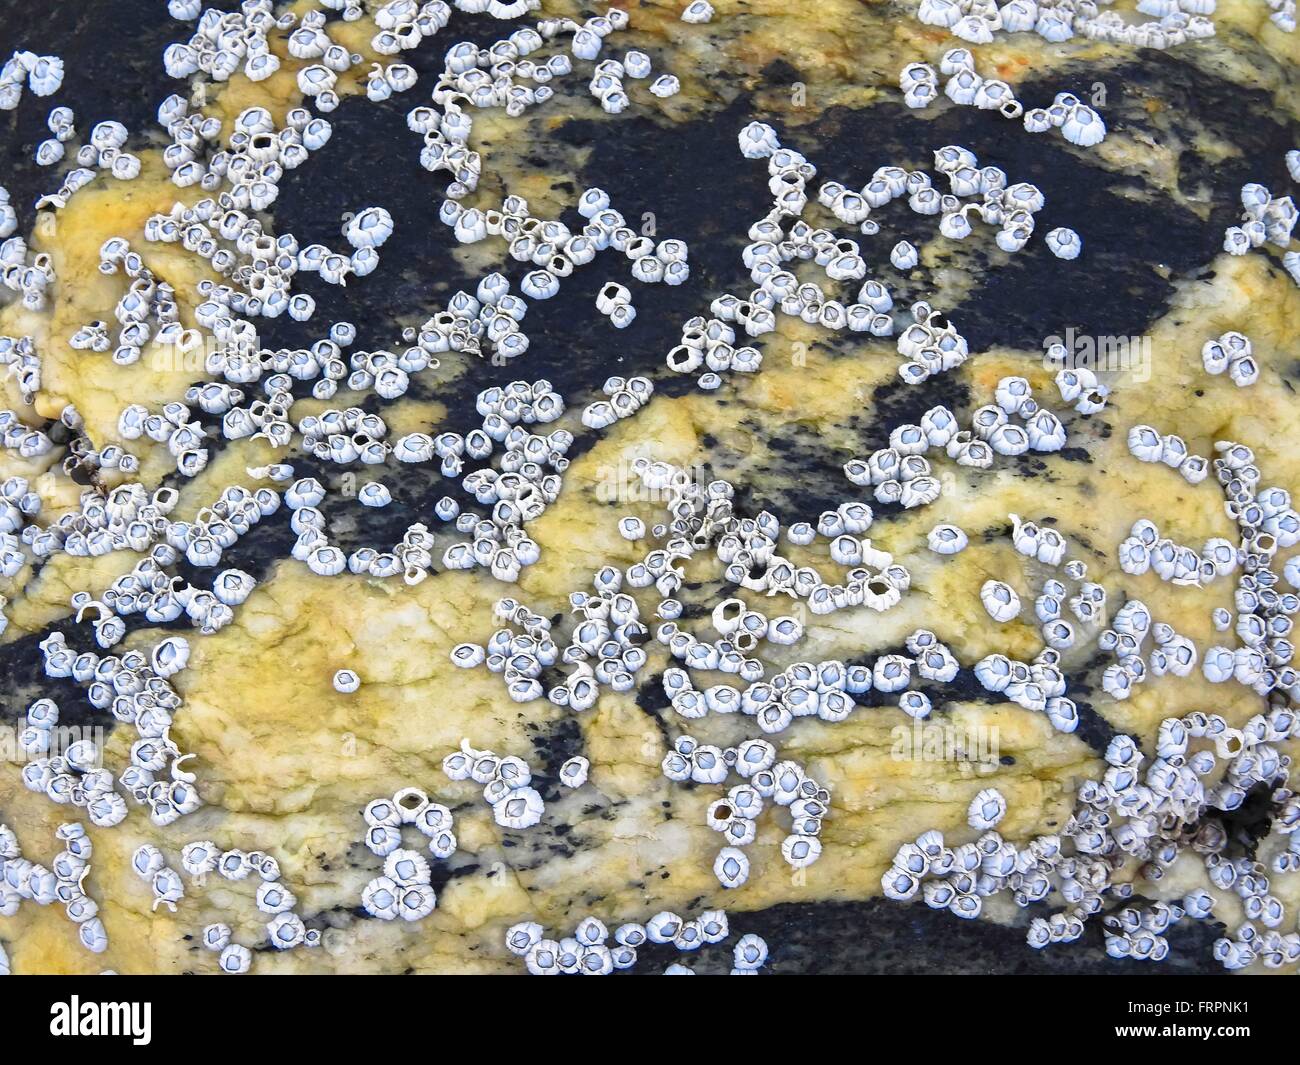 rock with Barnacles, march 2016 Stock Photo